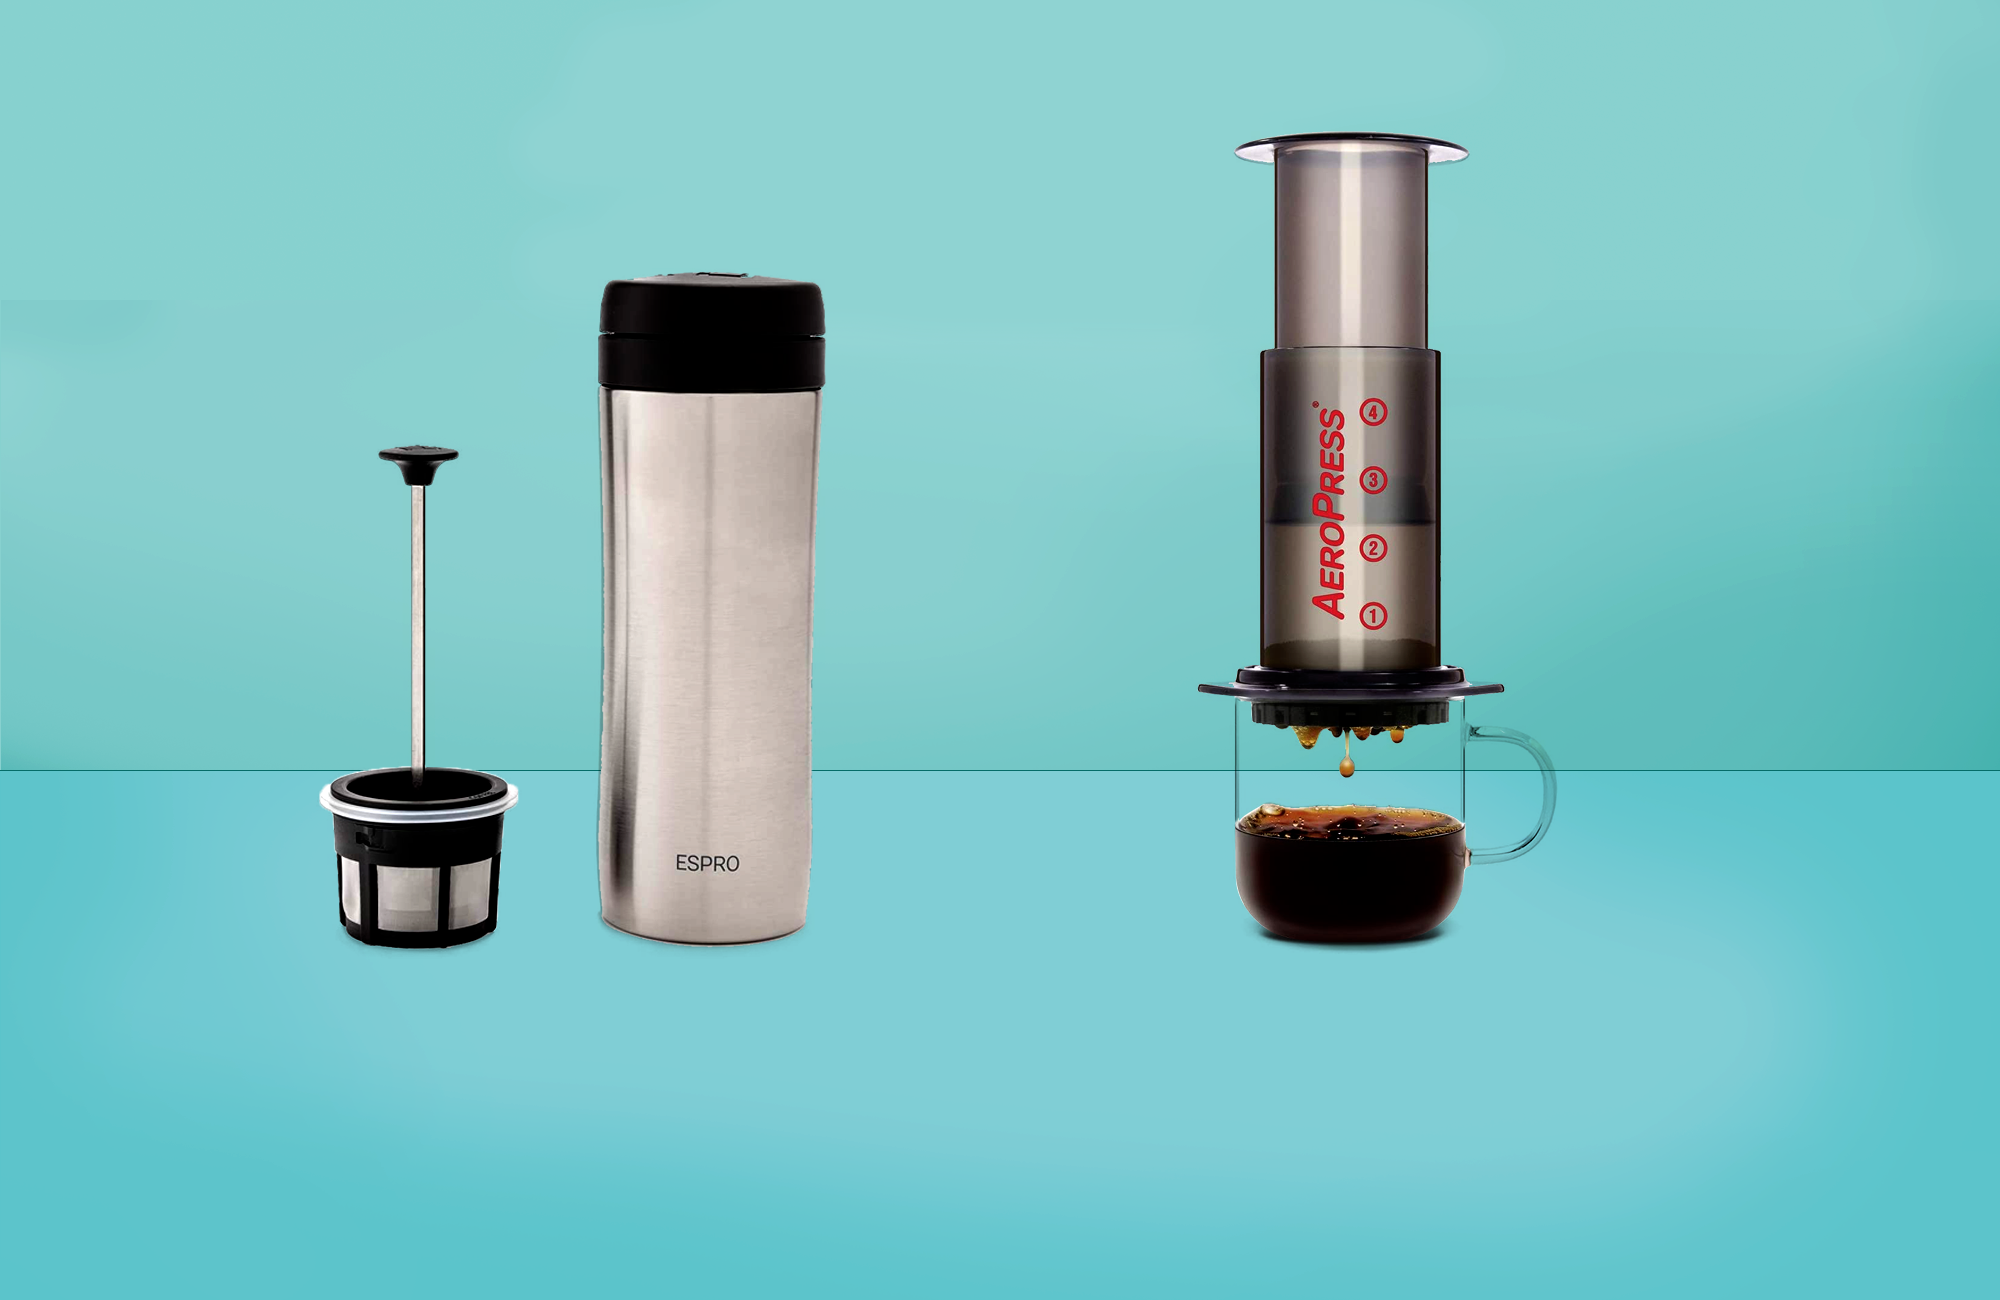 7 Best Coffee Makers for Camping in 2021 - Best Camping Coffee Makers